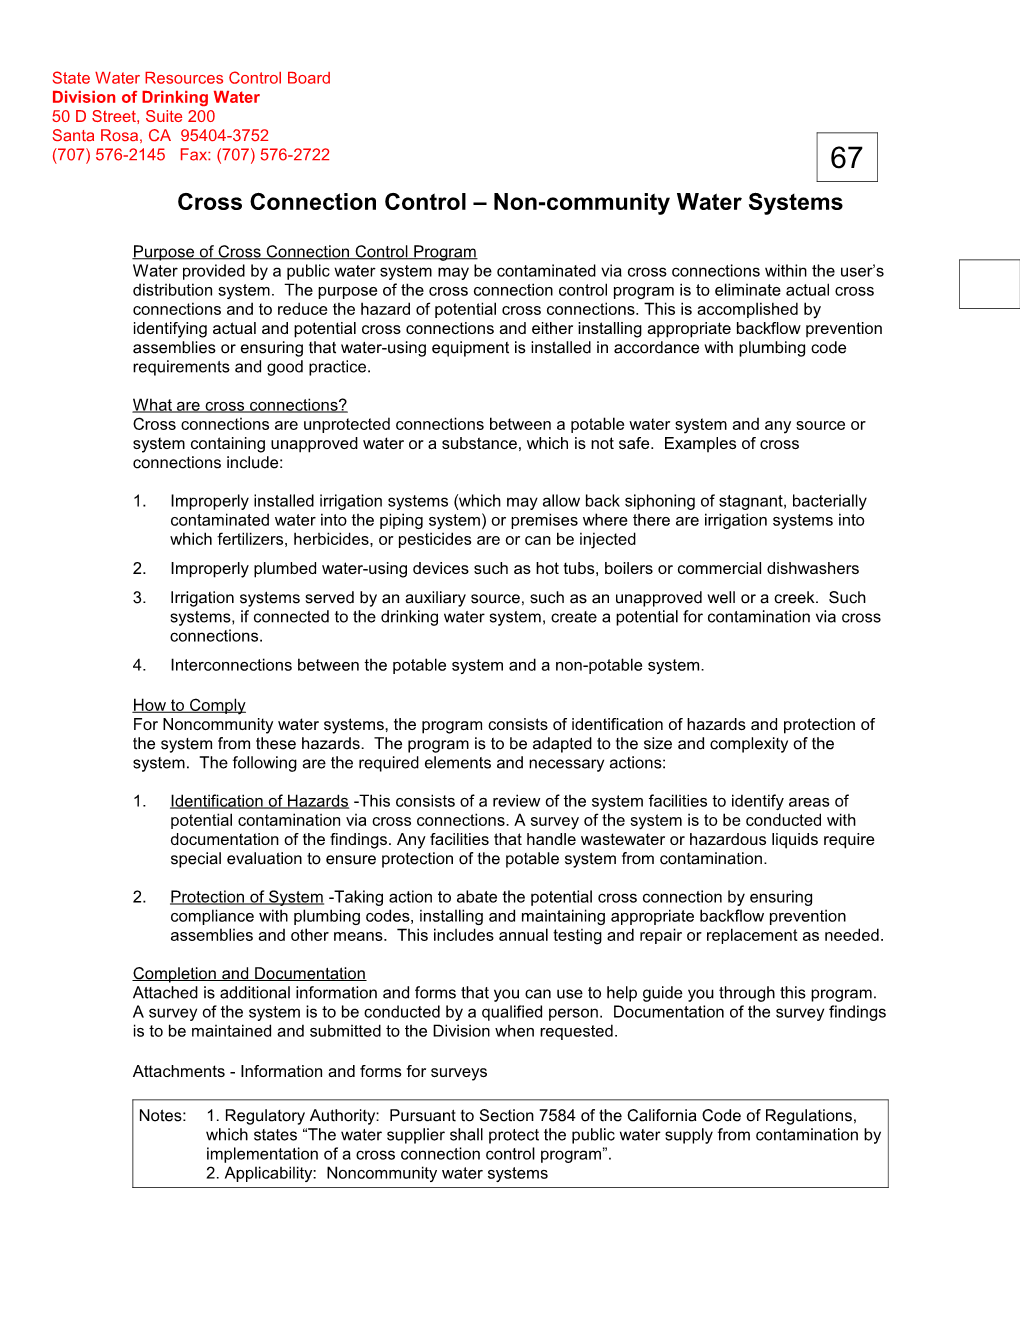 X-Connection Control for Non-Community Systems